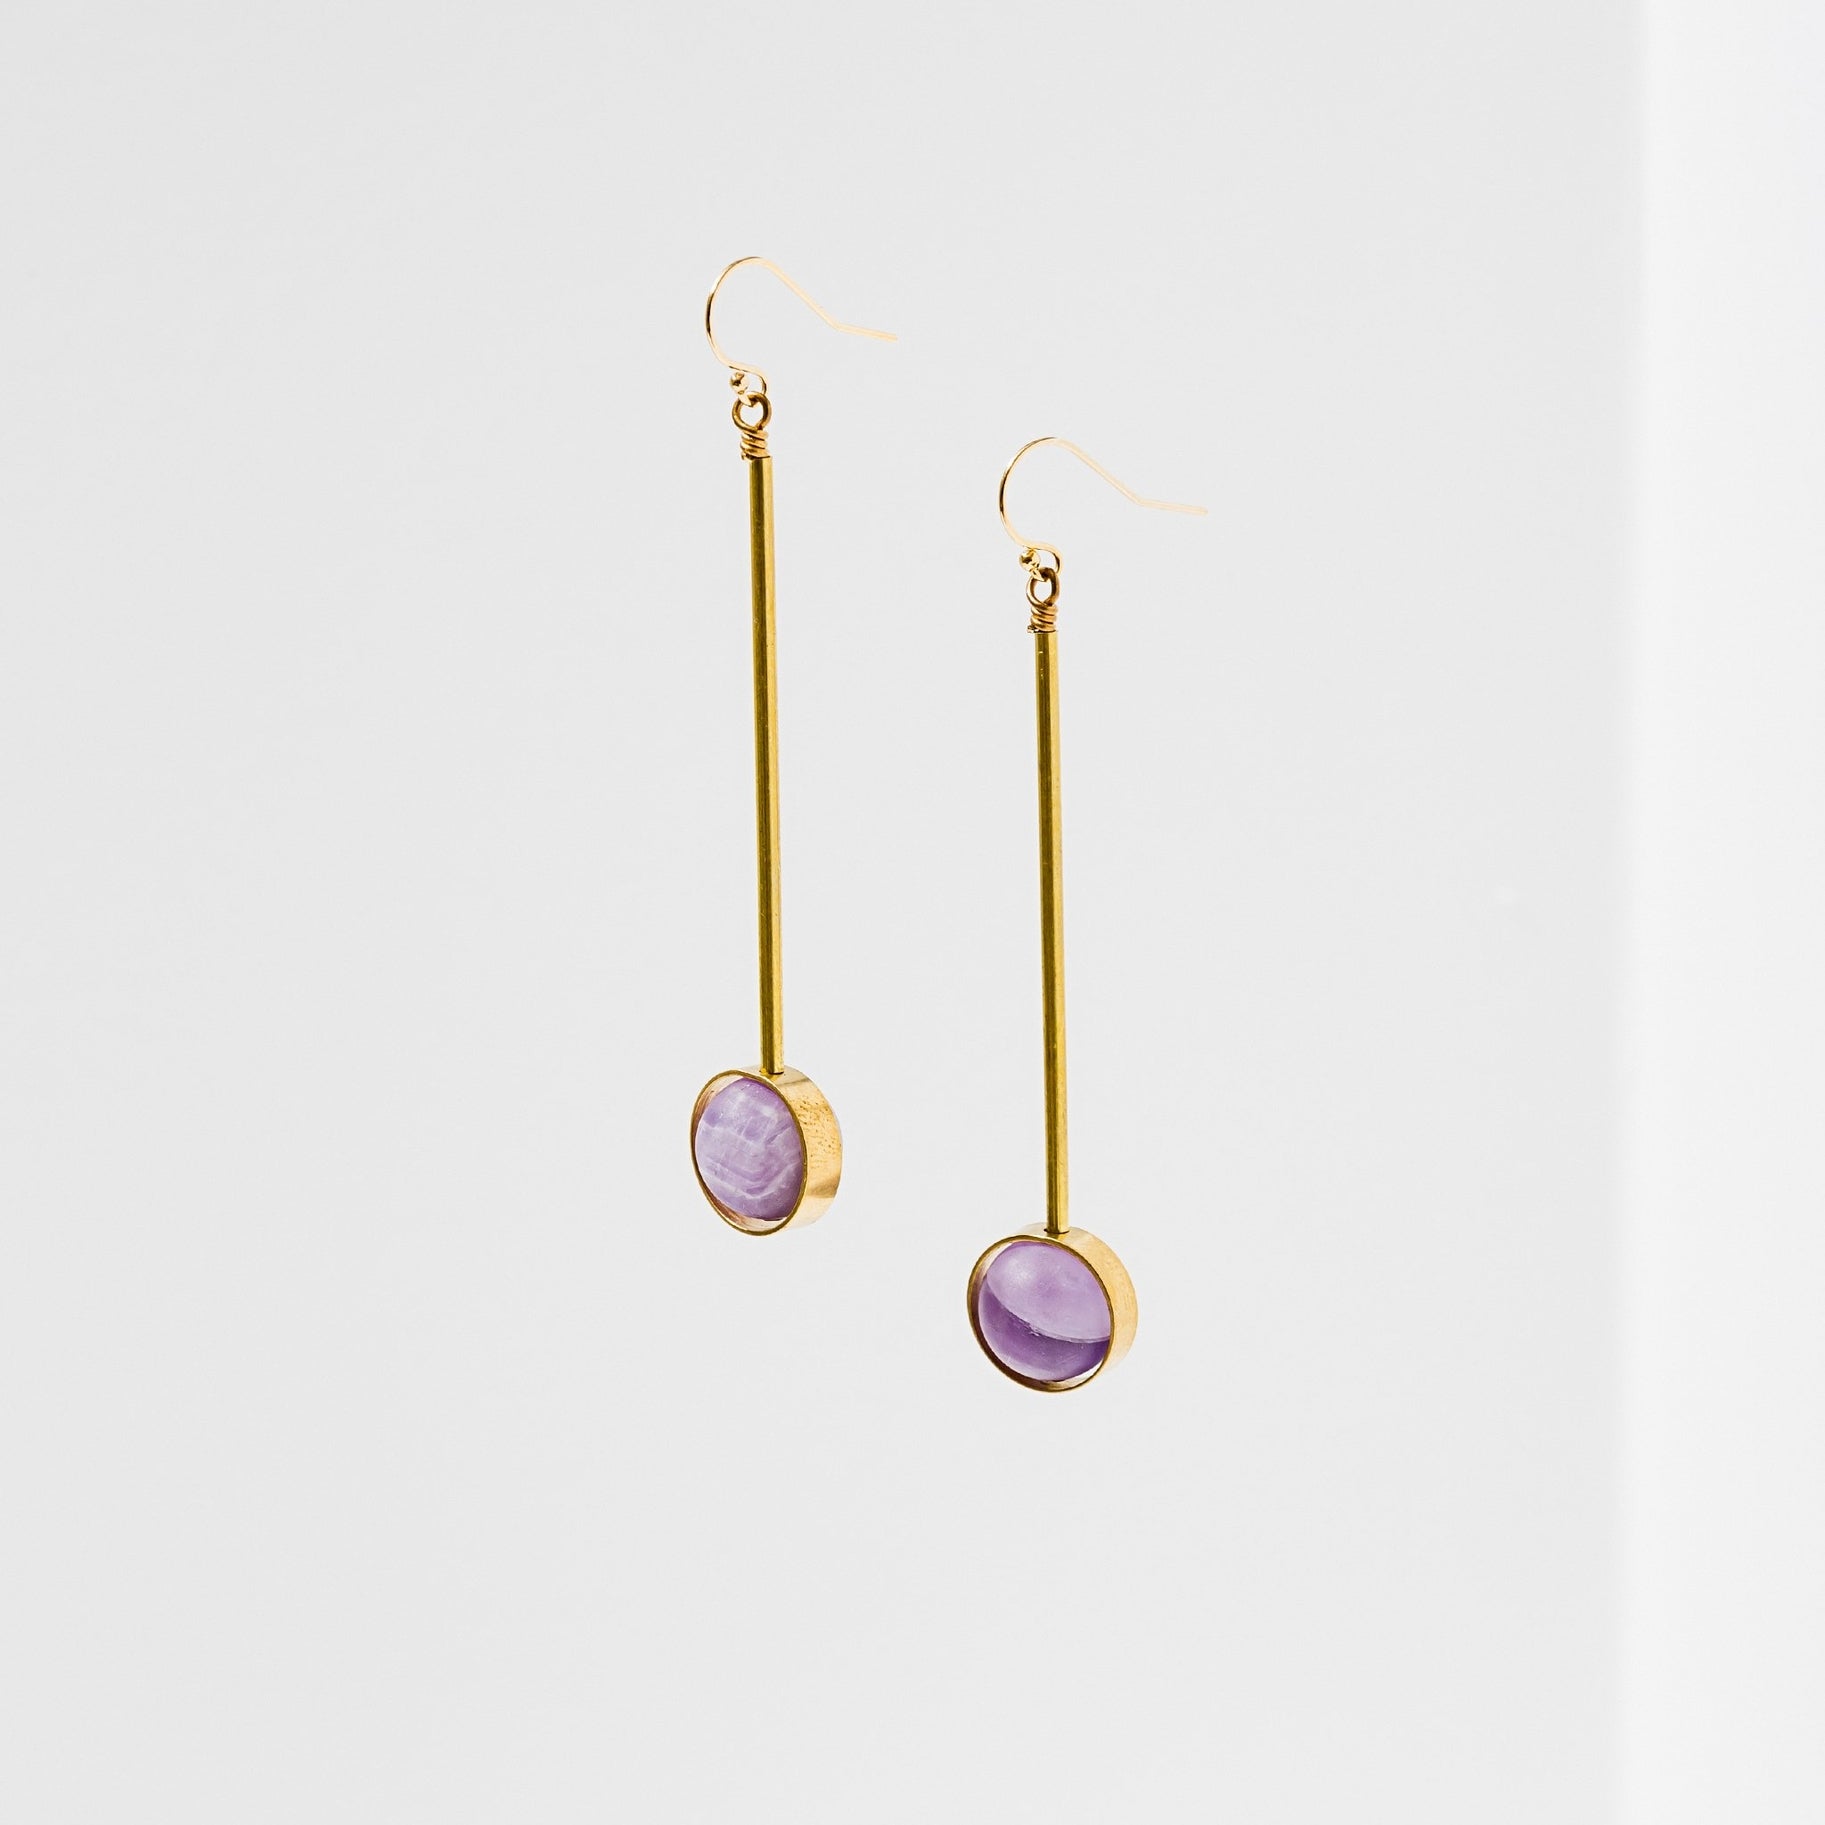 Aberrant Brass and Stone Earrings